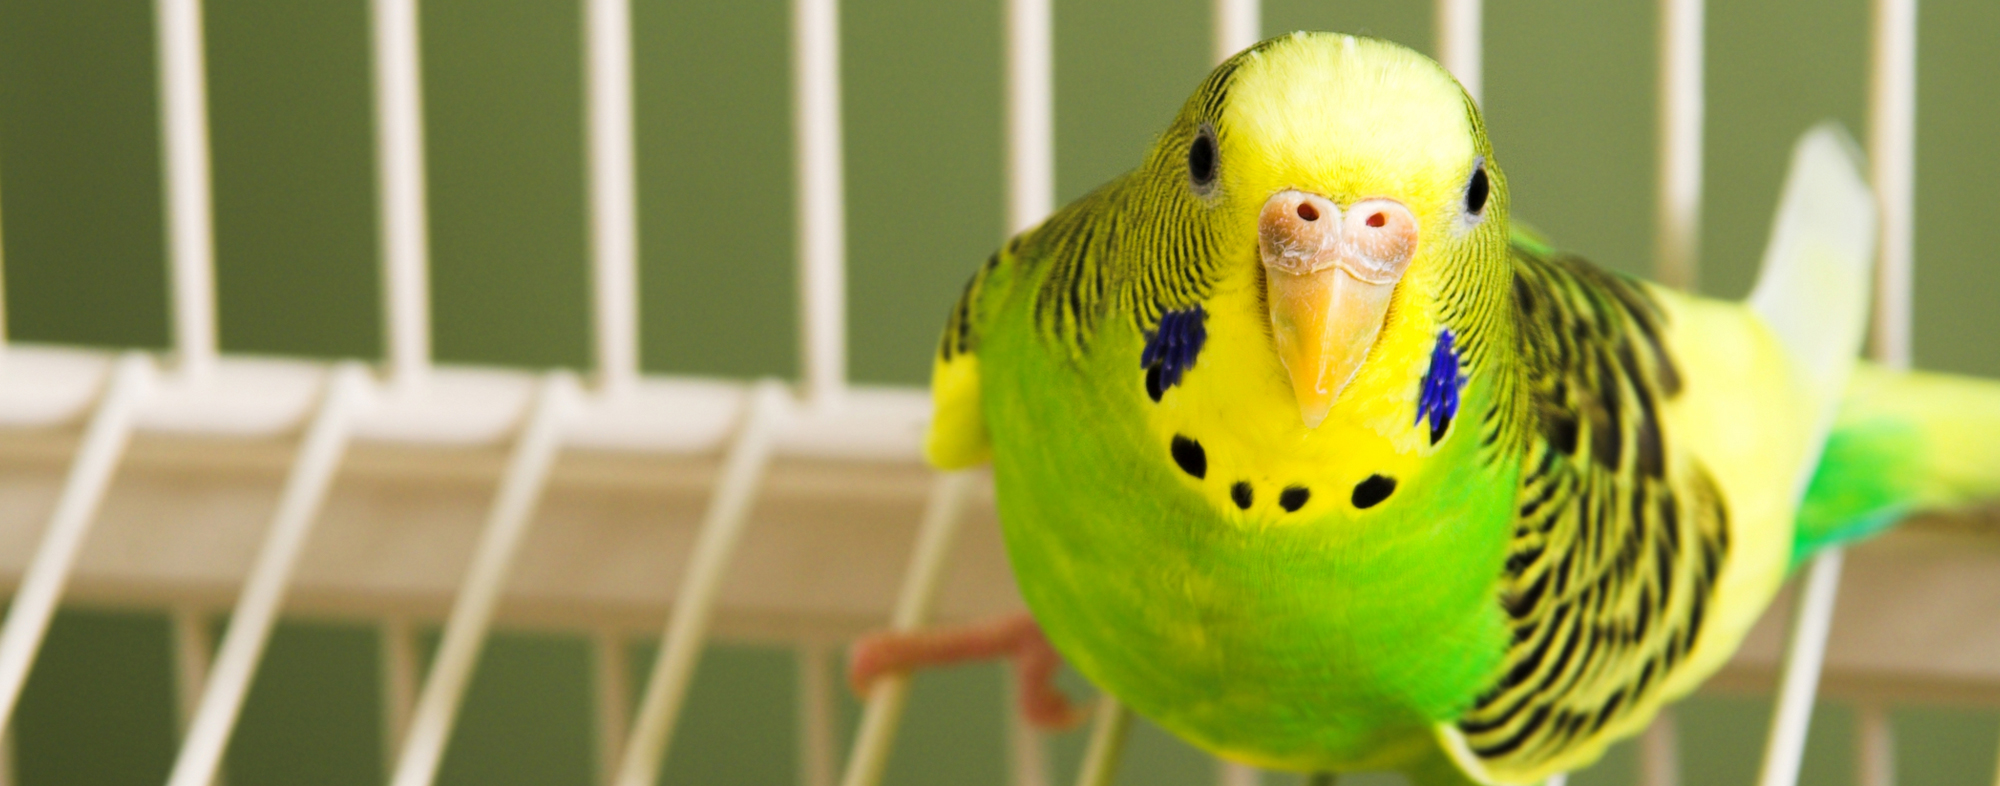 A fat green and yellow bird, perched in its cage